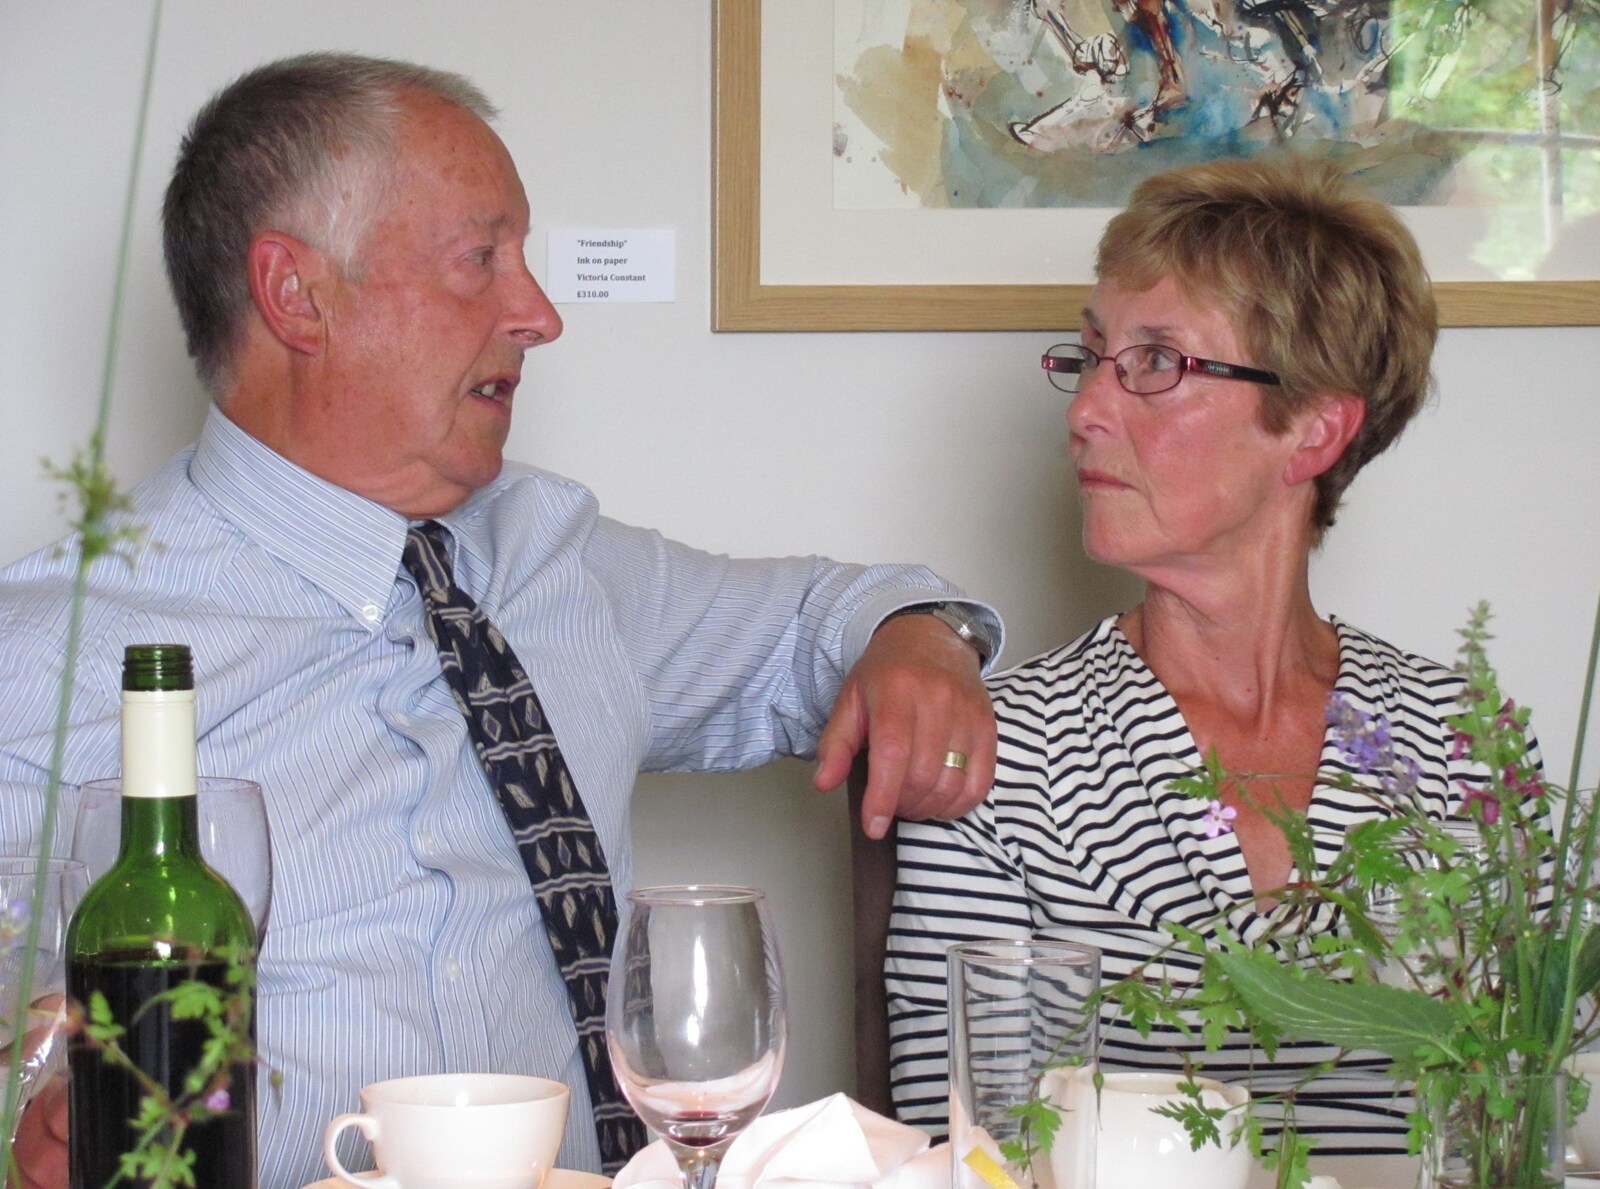 Matt's parents from Mike's Memorial, Prince Hall Hotel, Two Bridges, Dartmoor - 12th July 2011